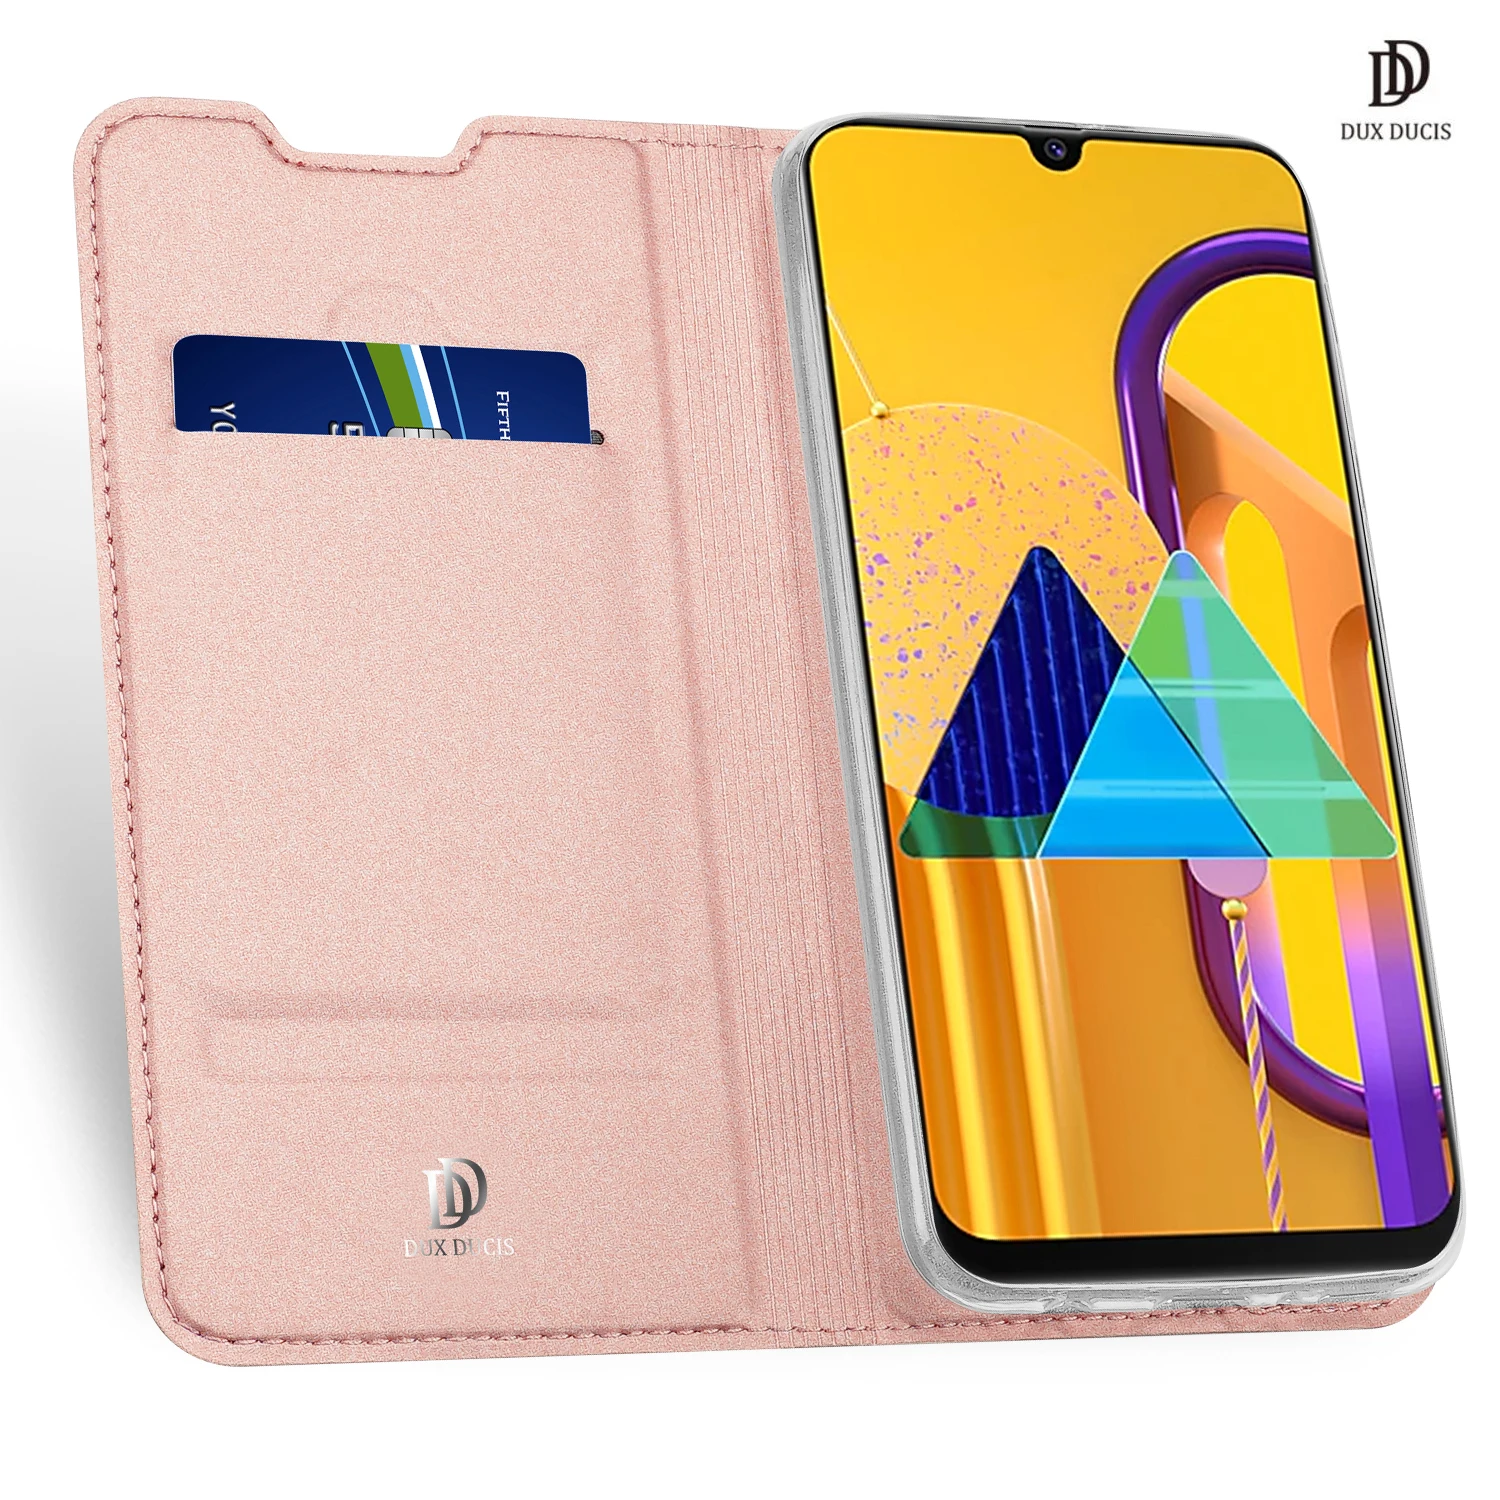 

For Samsung Galaxy M21 / M30s DUX DUCIS Skin Pro Series Flip Cover Luxury Leather Wallet Case Full Good Protection Steady Stand